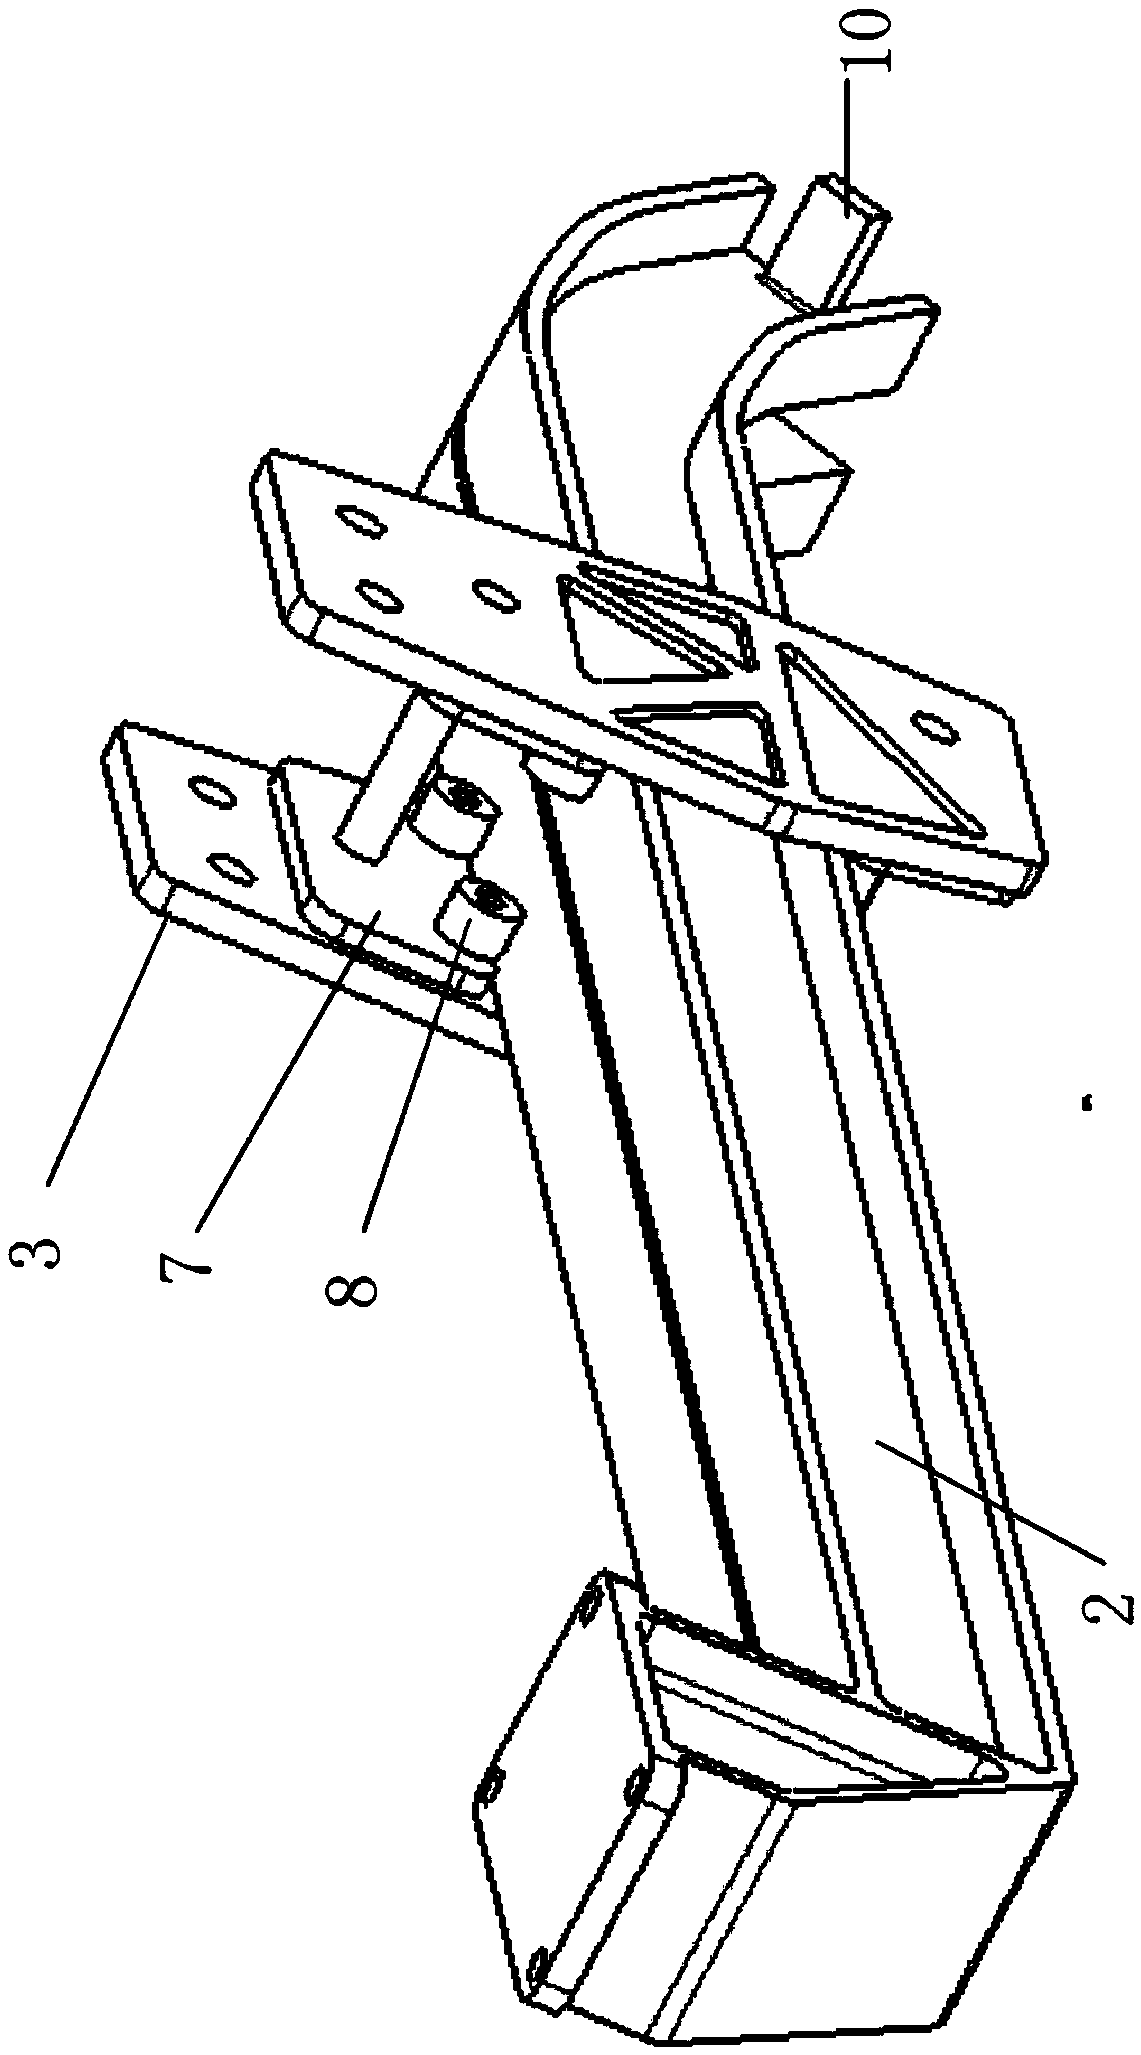 Pulley frame for aircraft slat rails